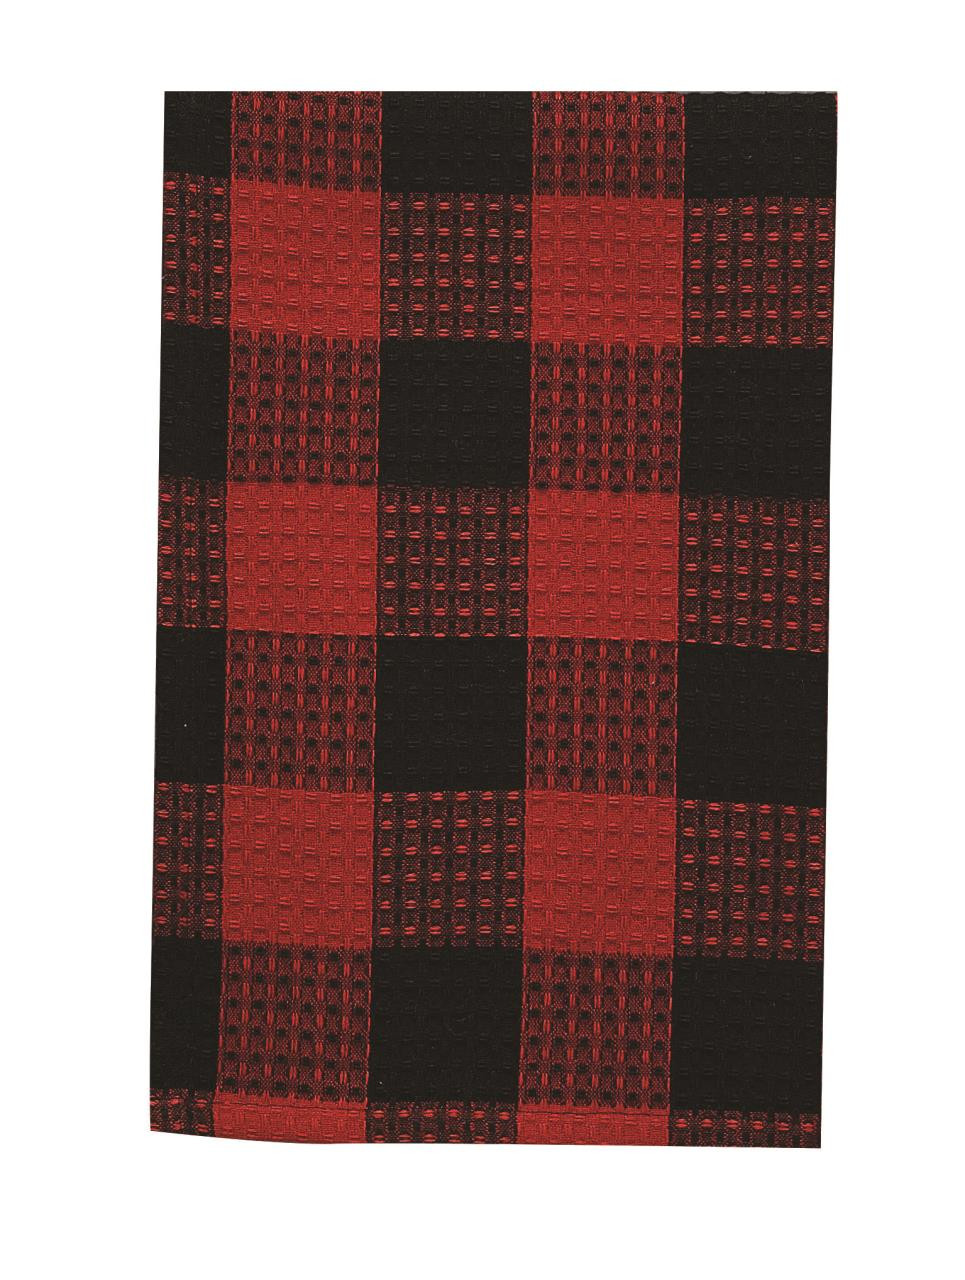 Farmhouse Buffalo Check Waffle Weave Red and White Kitchen Towels